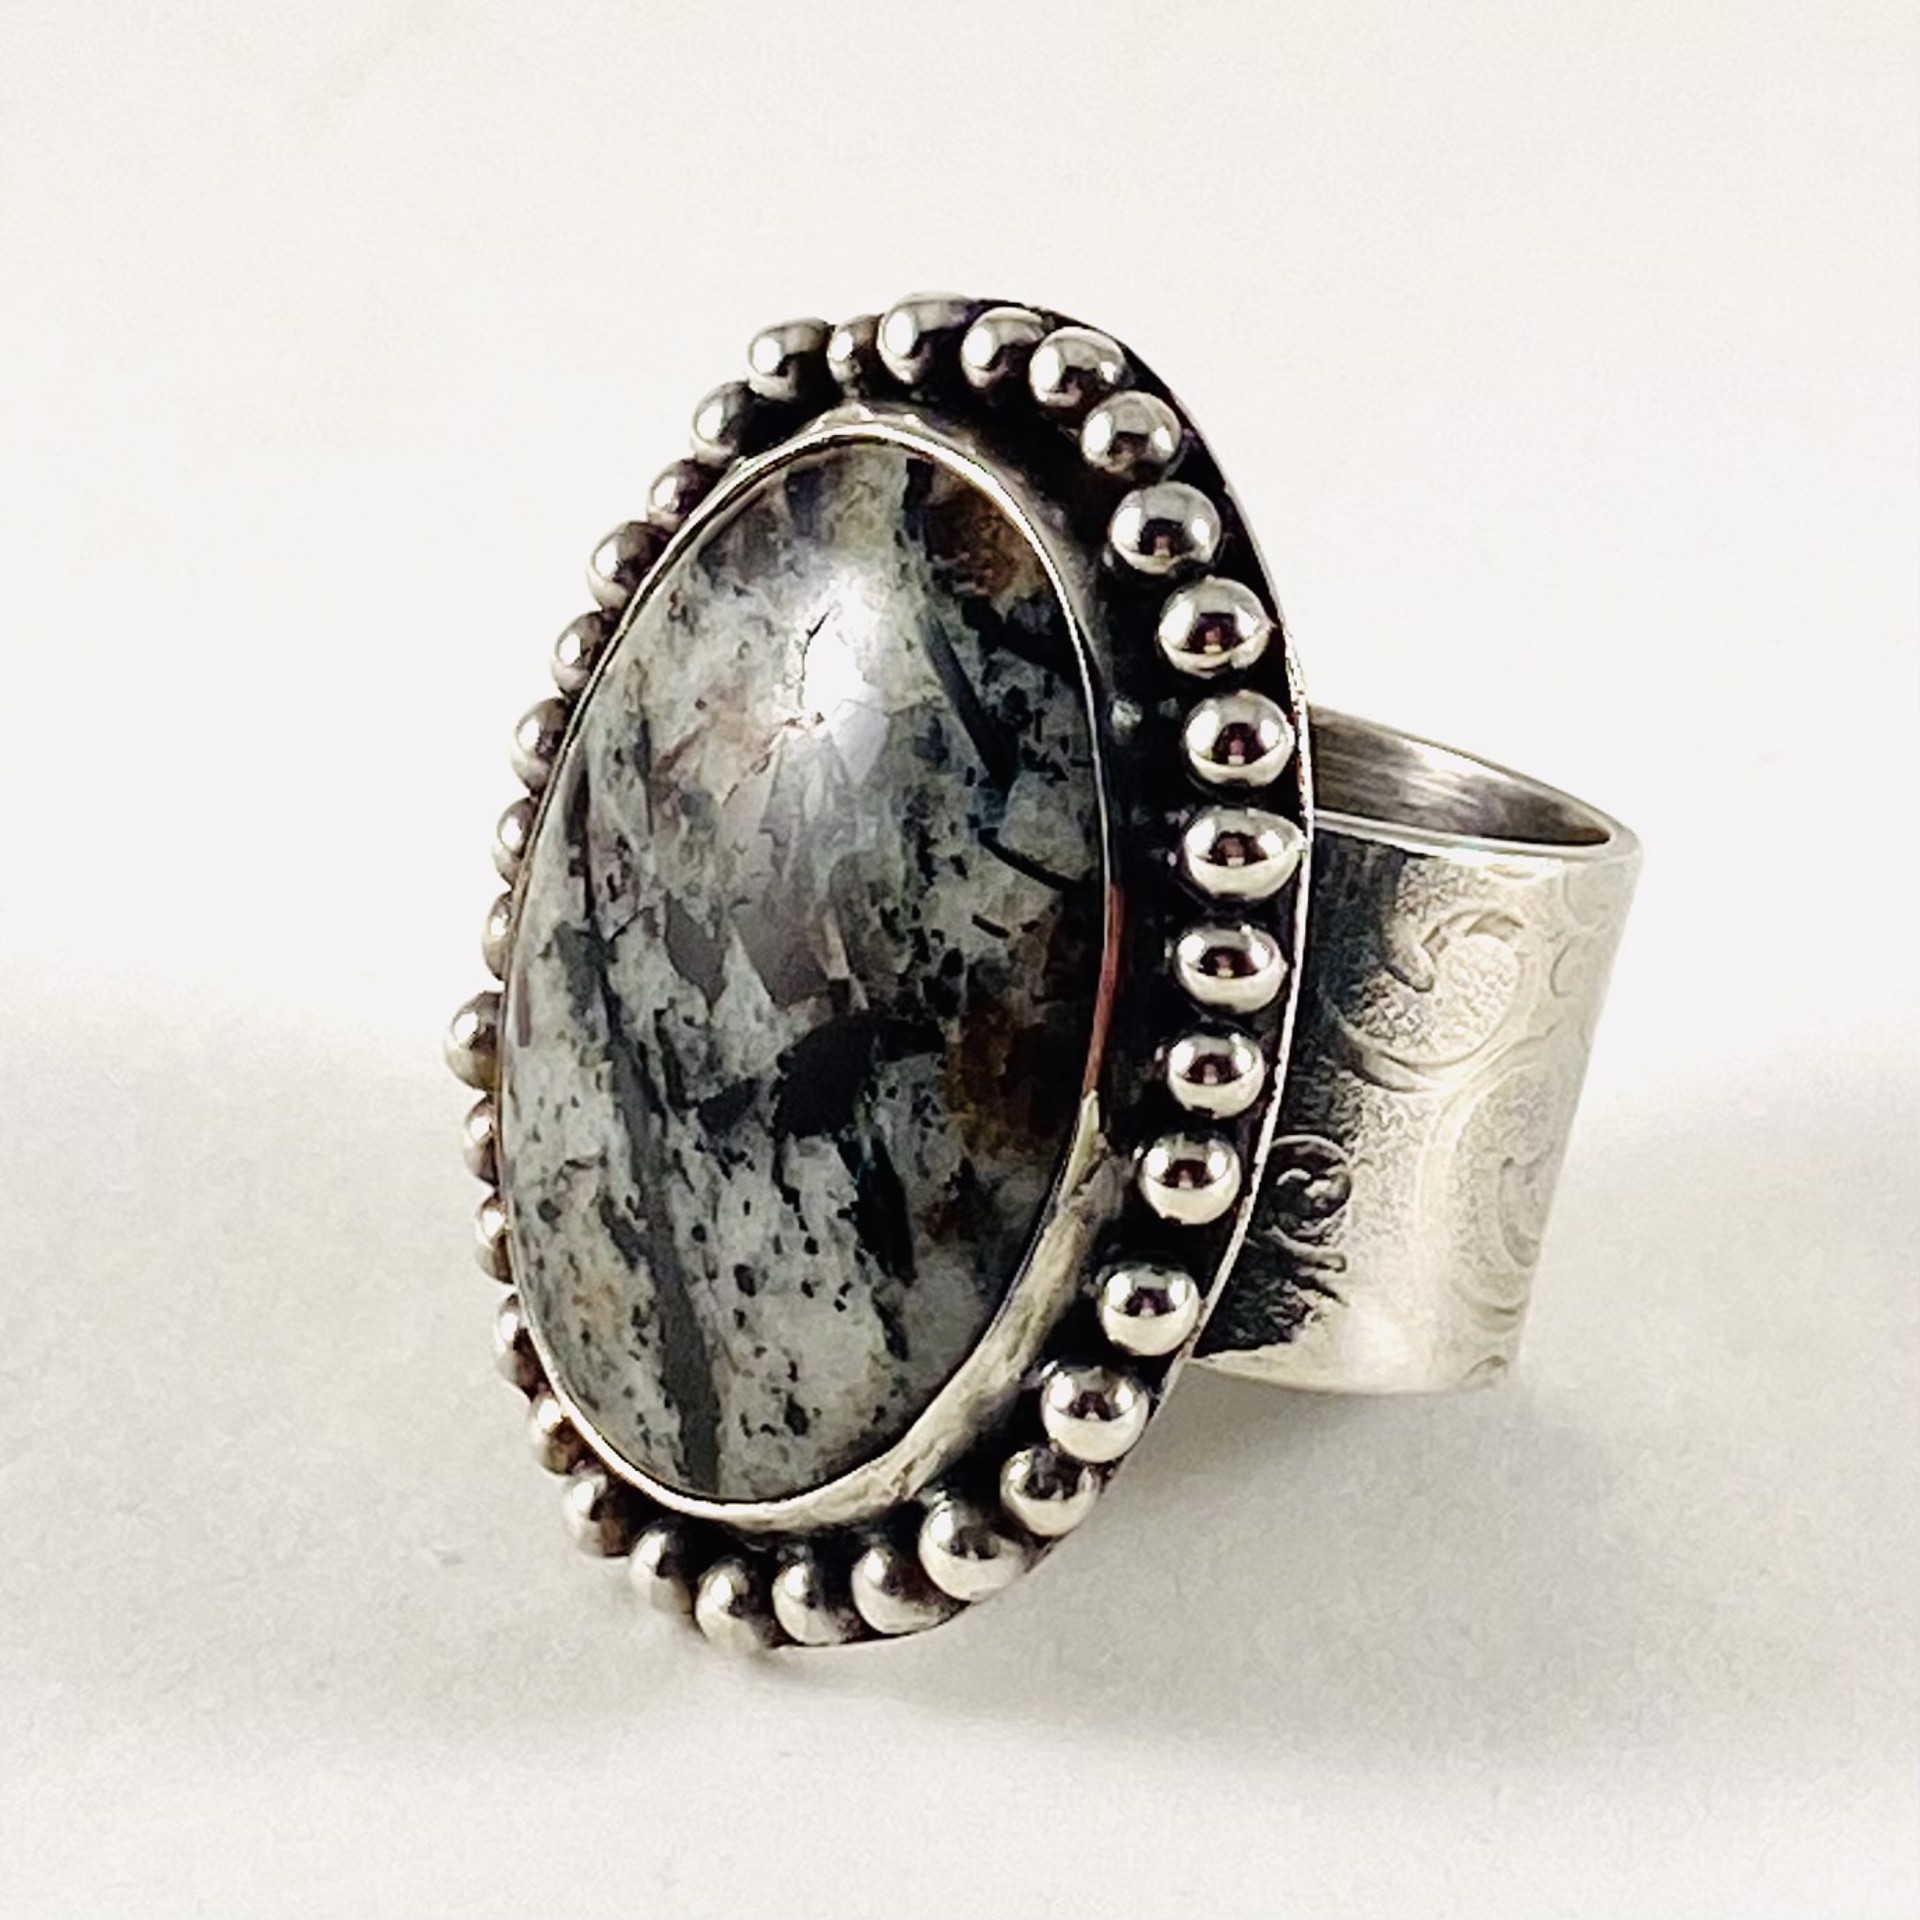 Russian Astrophyllite Ring sz 7.5 AB21-17 by Anne Bivens